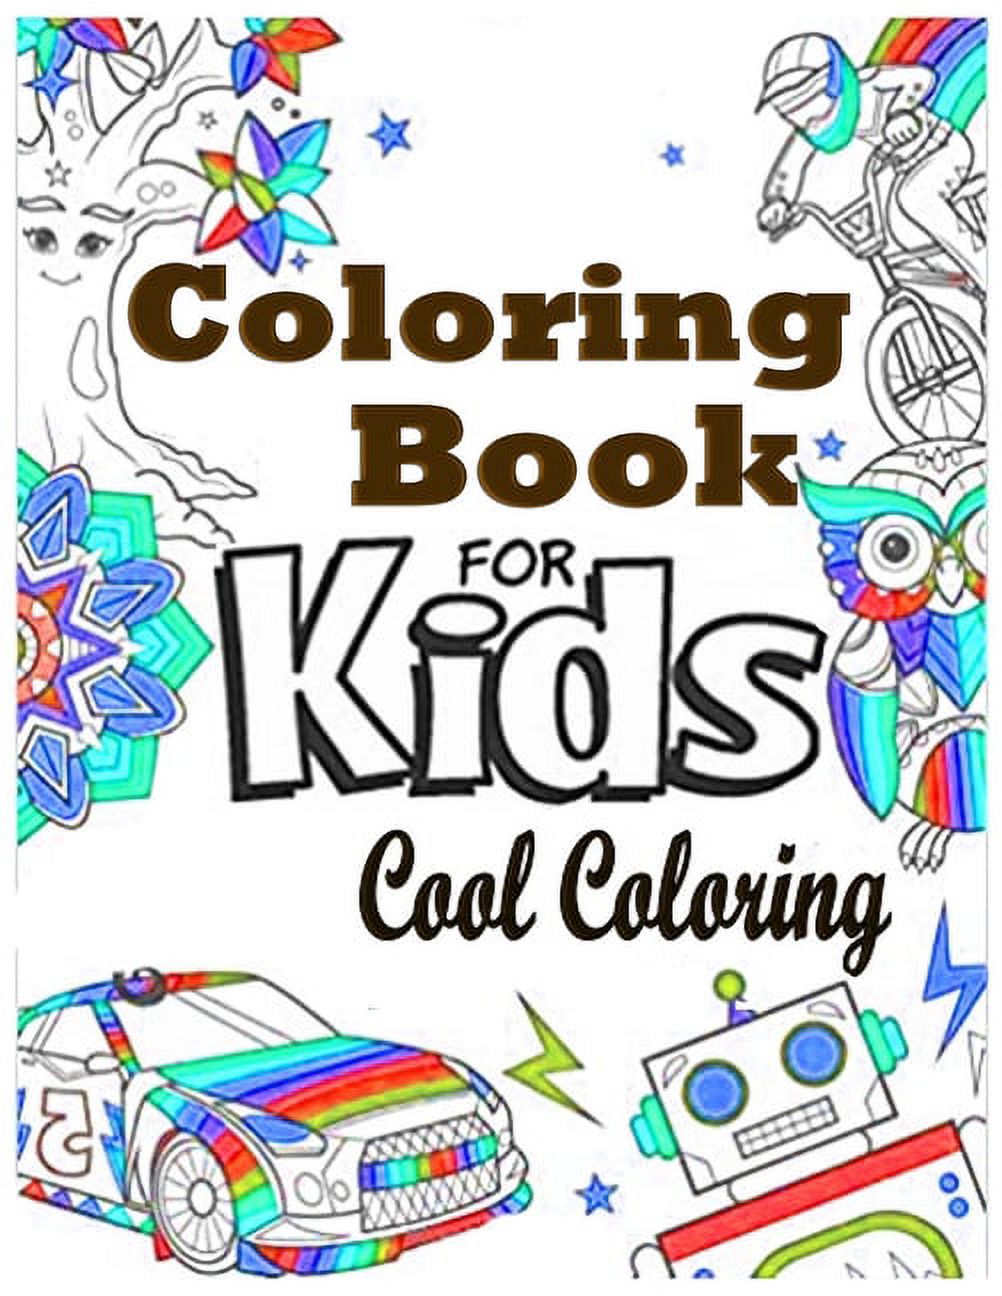 Coloring Books For Kids Cool Coloring : For Girls & Boys Aged 6-12: Cool  Coloring Pages & Inspirational, Positive Messages About Being Cool